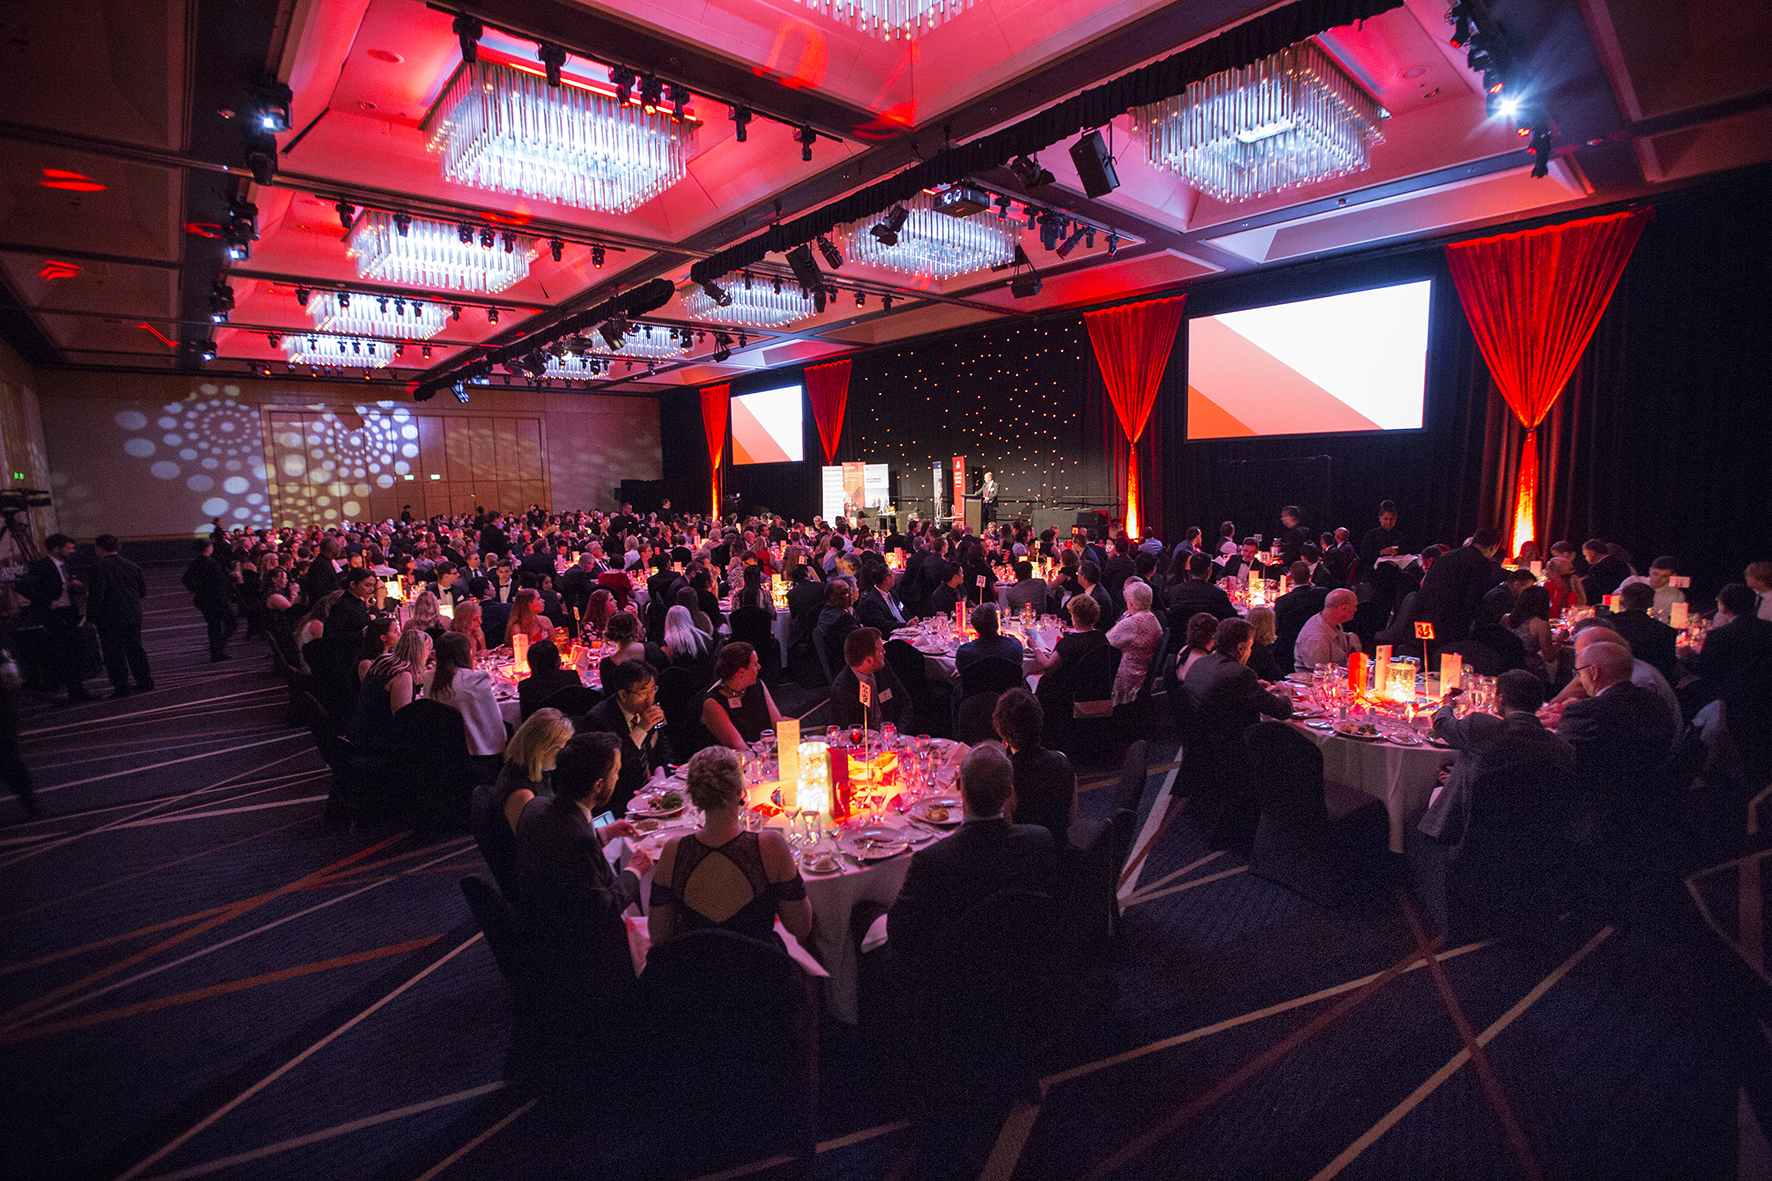 Griffith Business School Gala Dinner and Awards